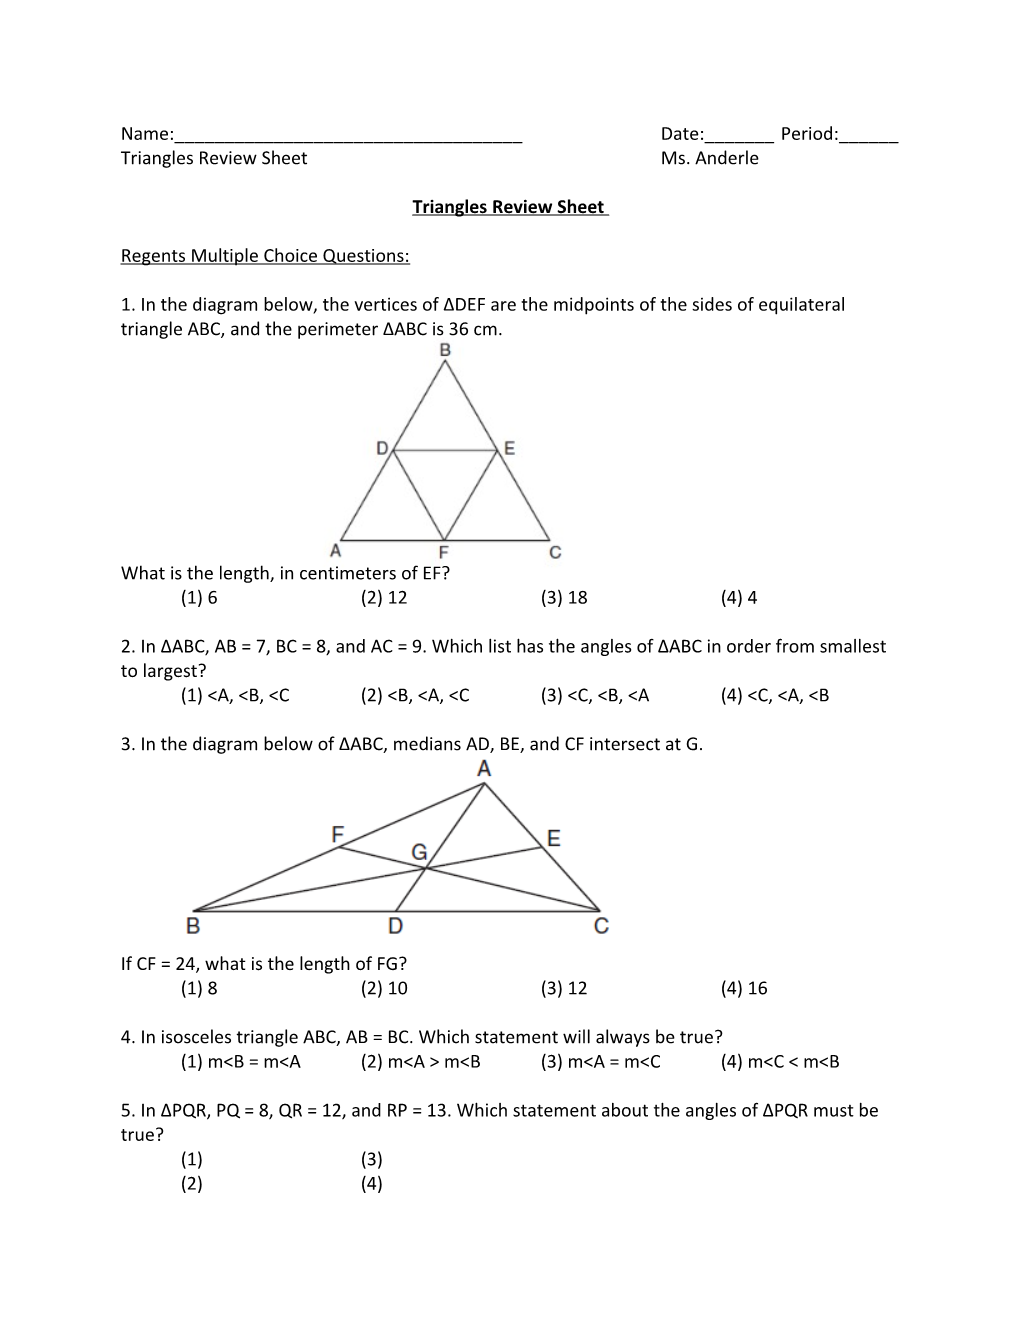 Triangles Review Sheetms. Anderle